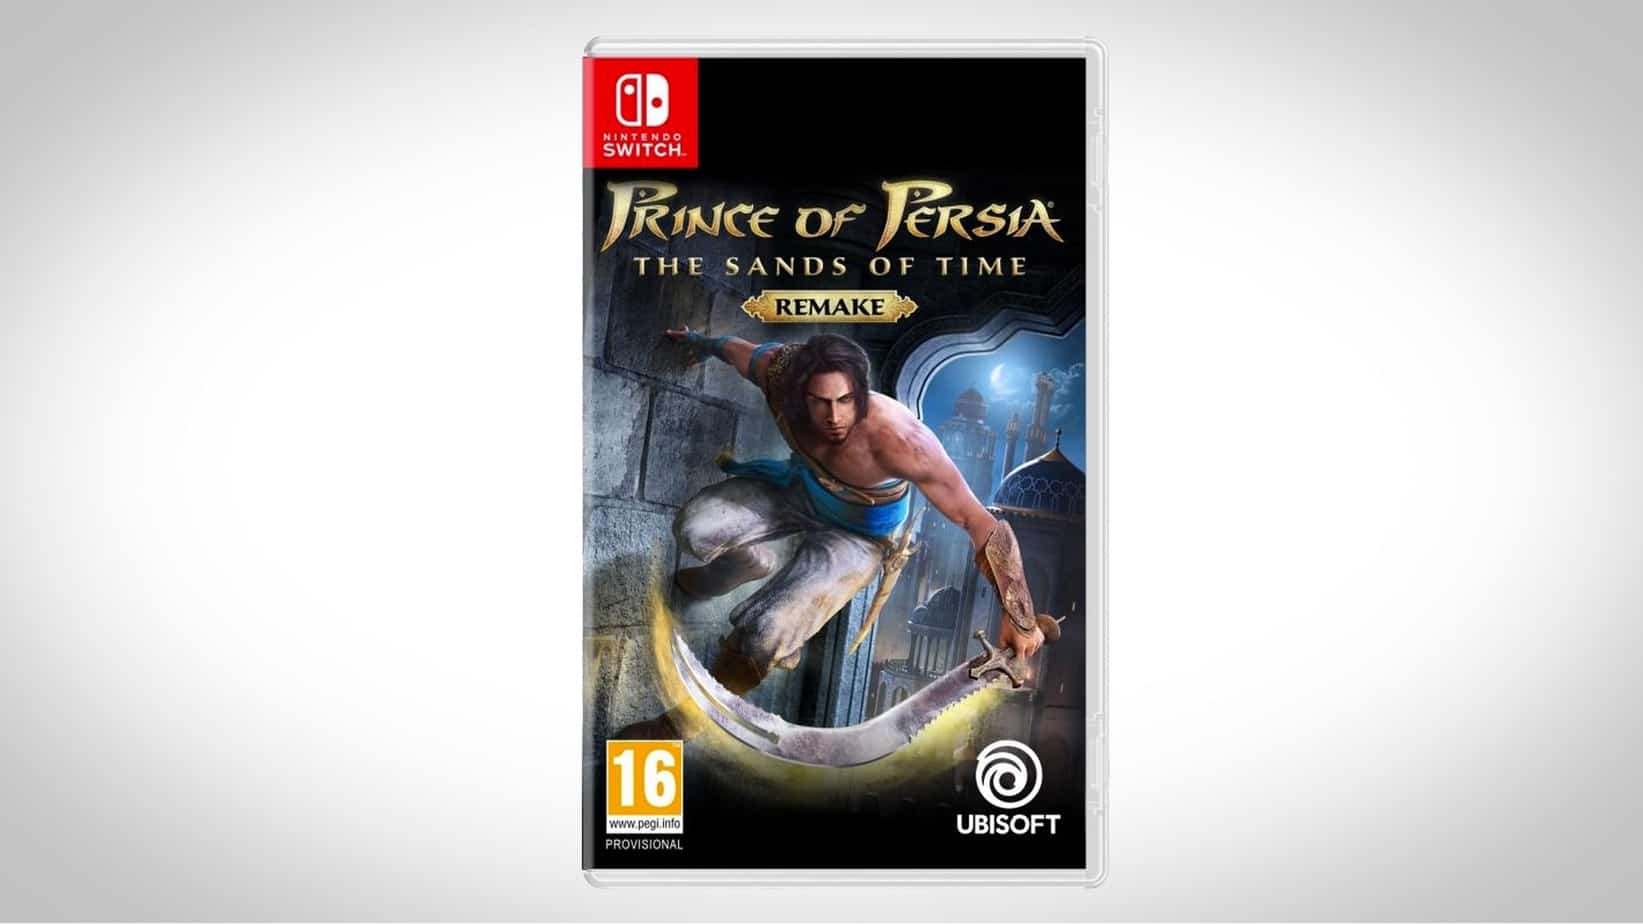 Prince of Persia: The Sands of Time Remake for Nintendo Switch